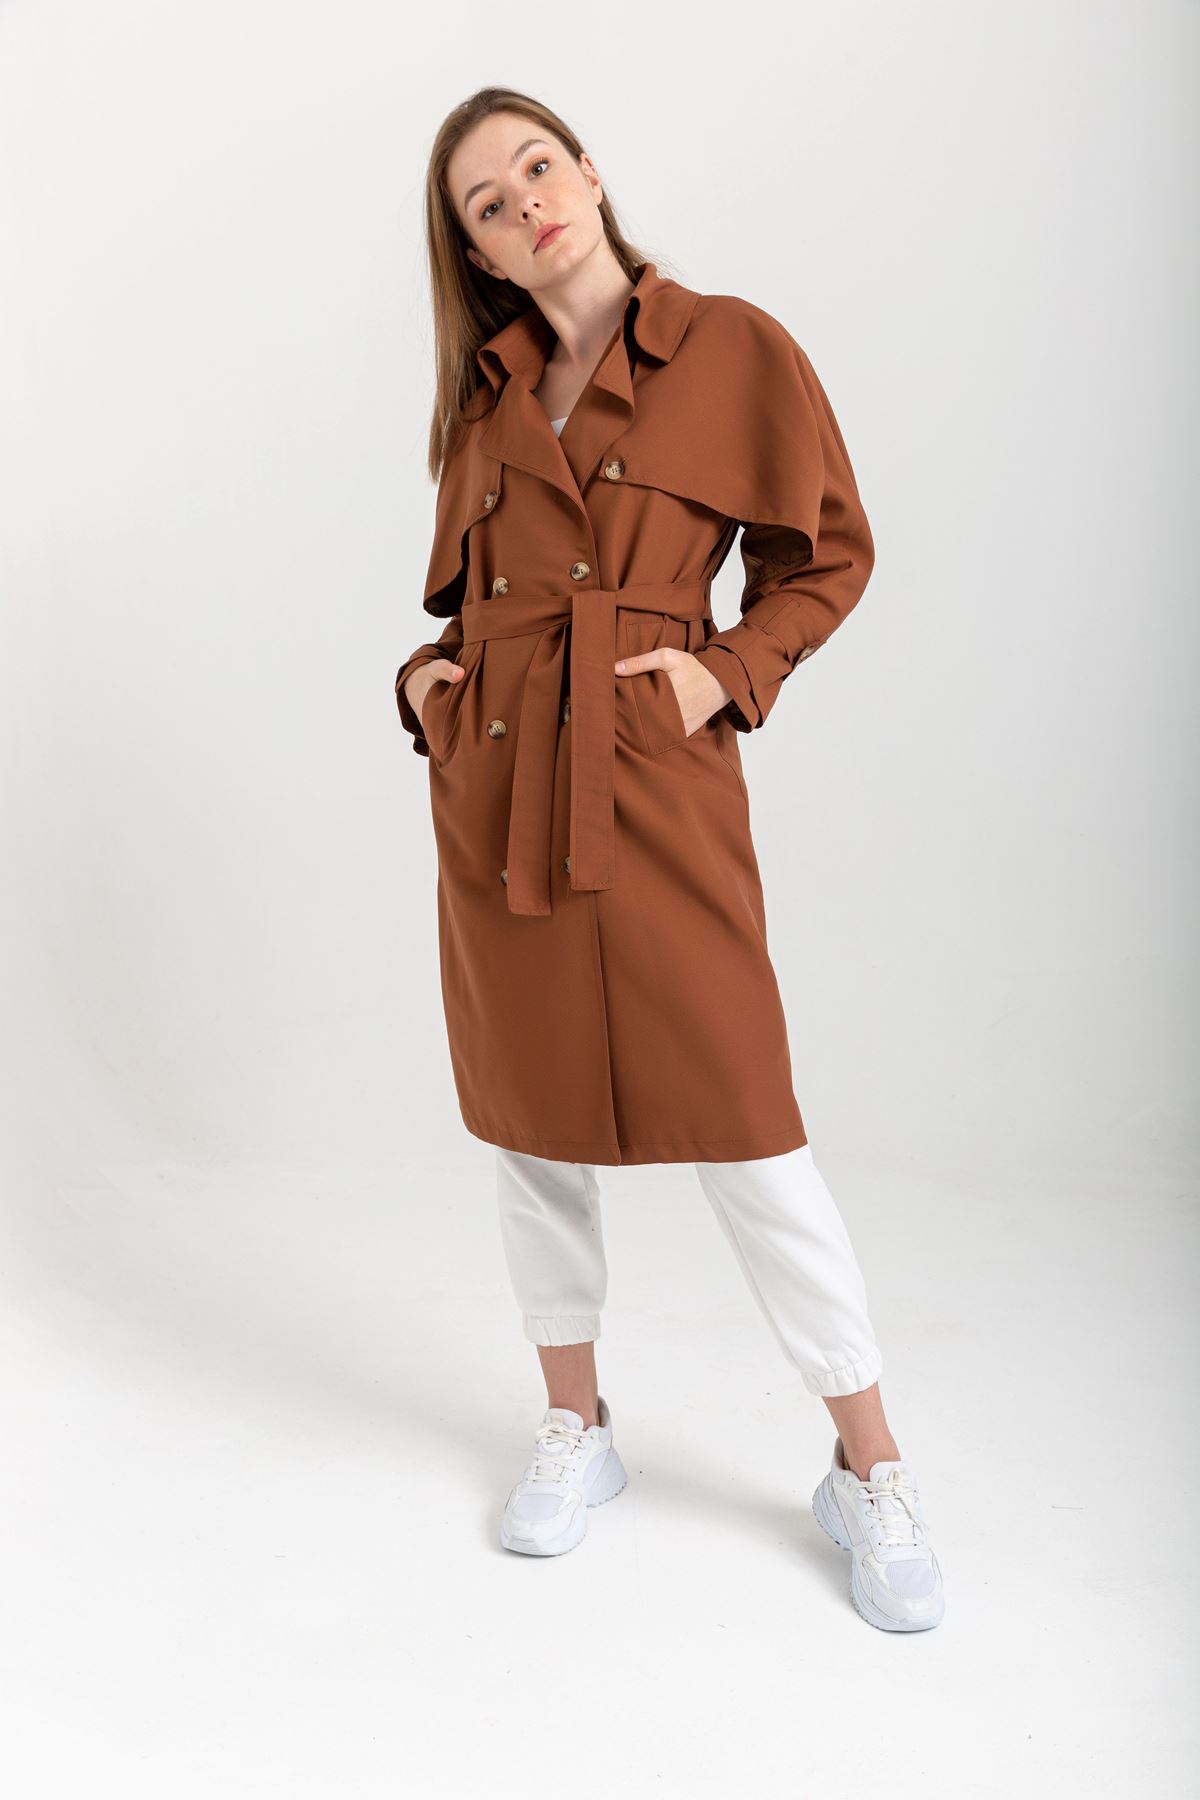 Soft Fabric Long Sleeve Shirt Collar Women Trench Coat With Belt - Brown